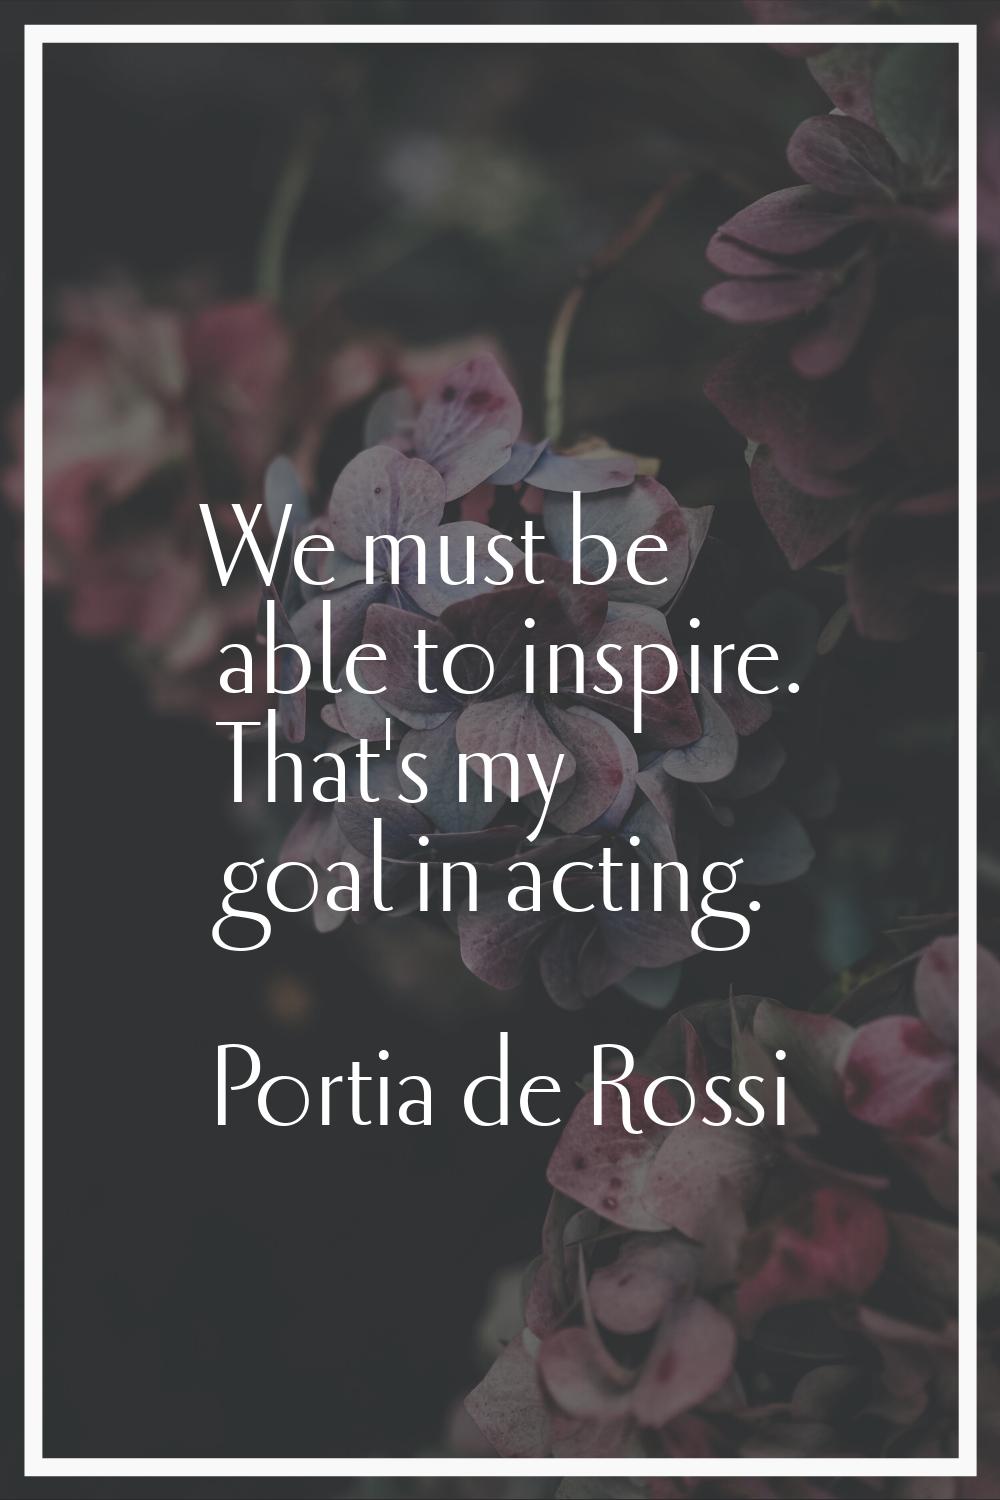 We must be able to inspire. That's my goal in acting.